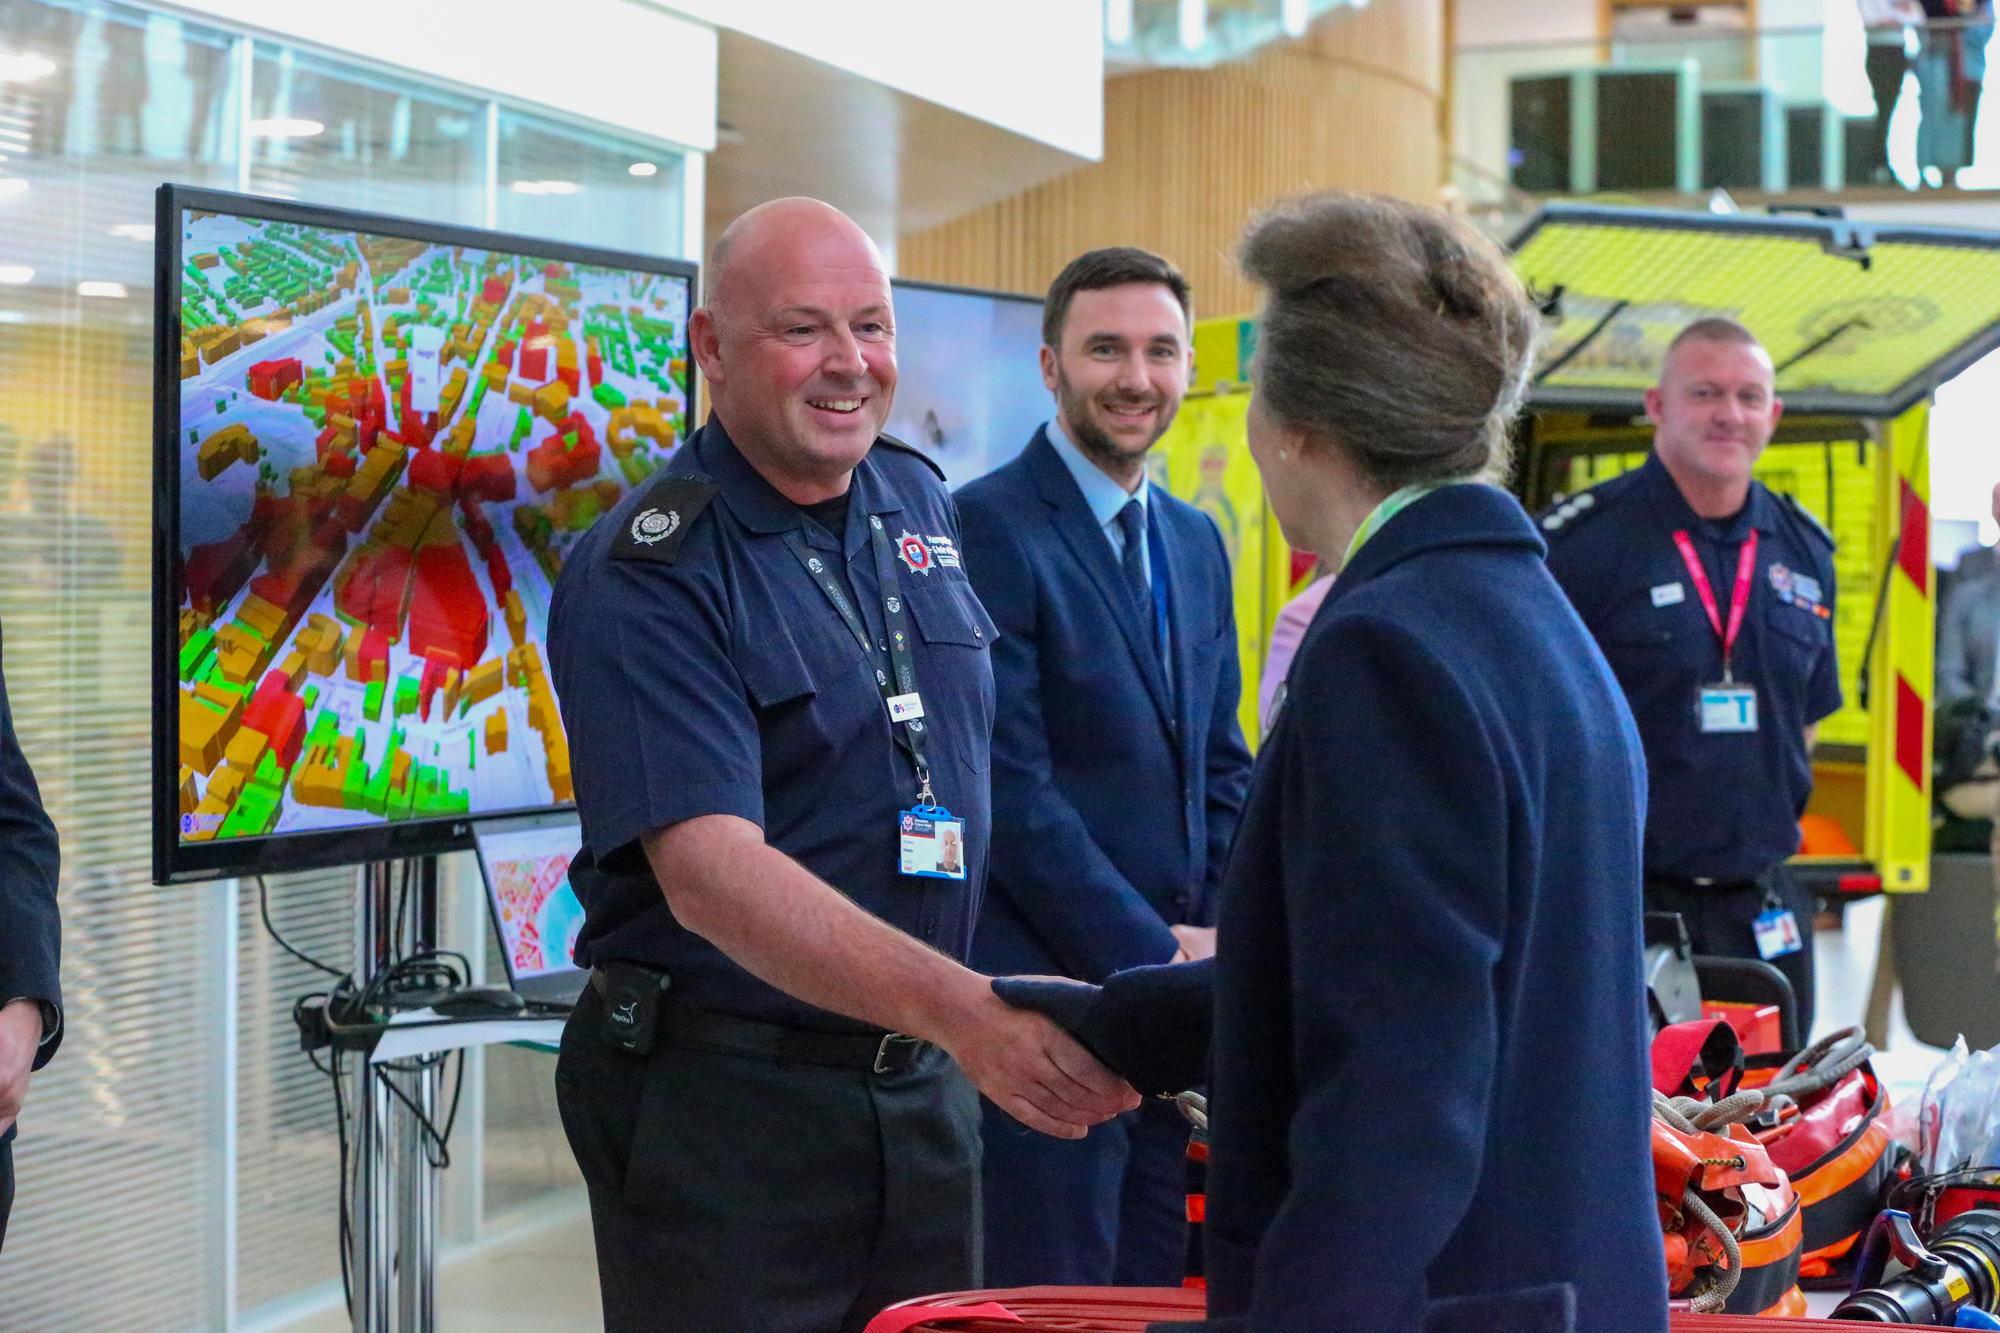 The Princess Royal met with Hampshire and Isle of Wight Fire and Rescue Service at the event